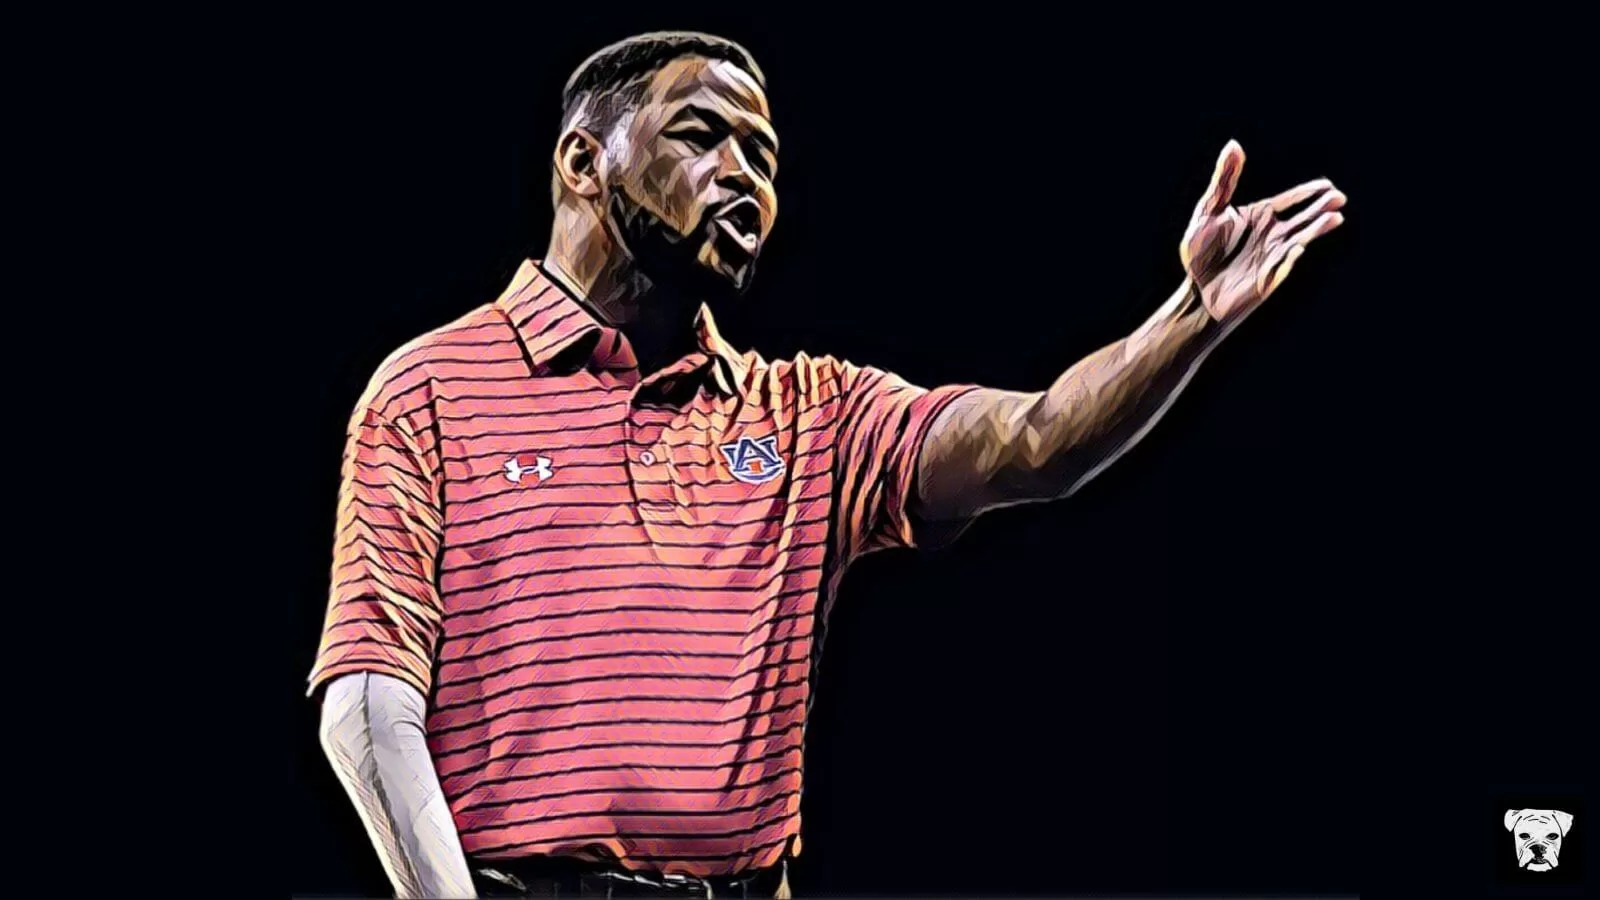 The best Inky Johnson quotes ever